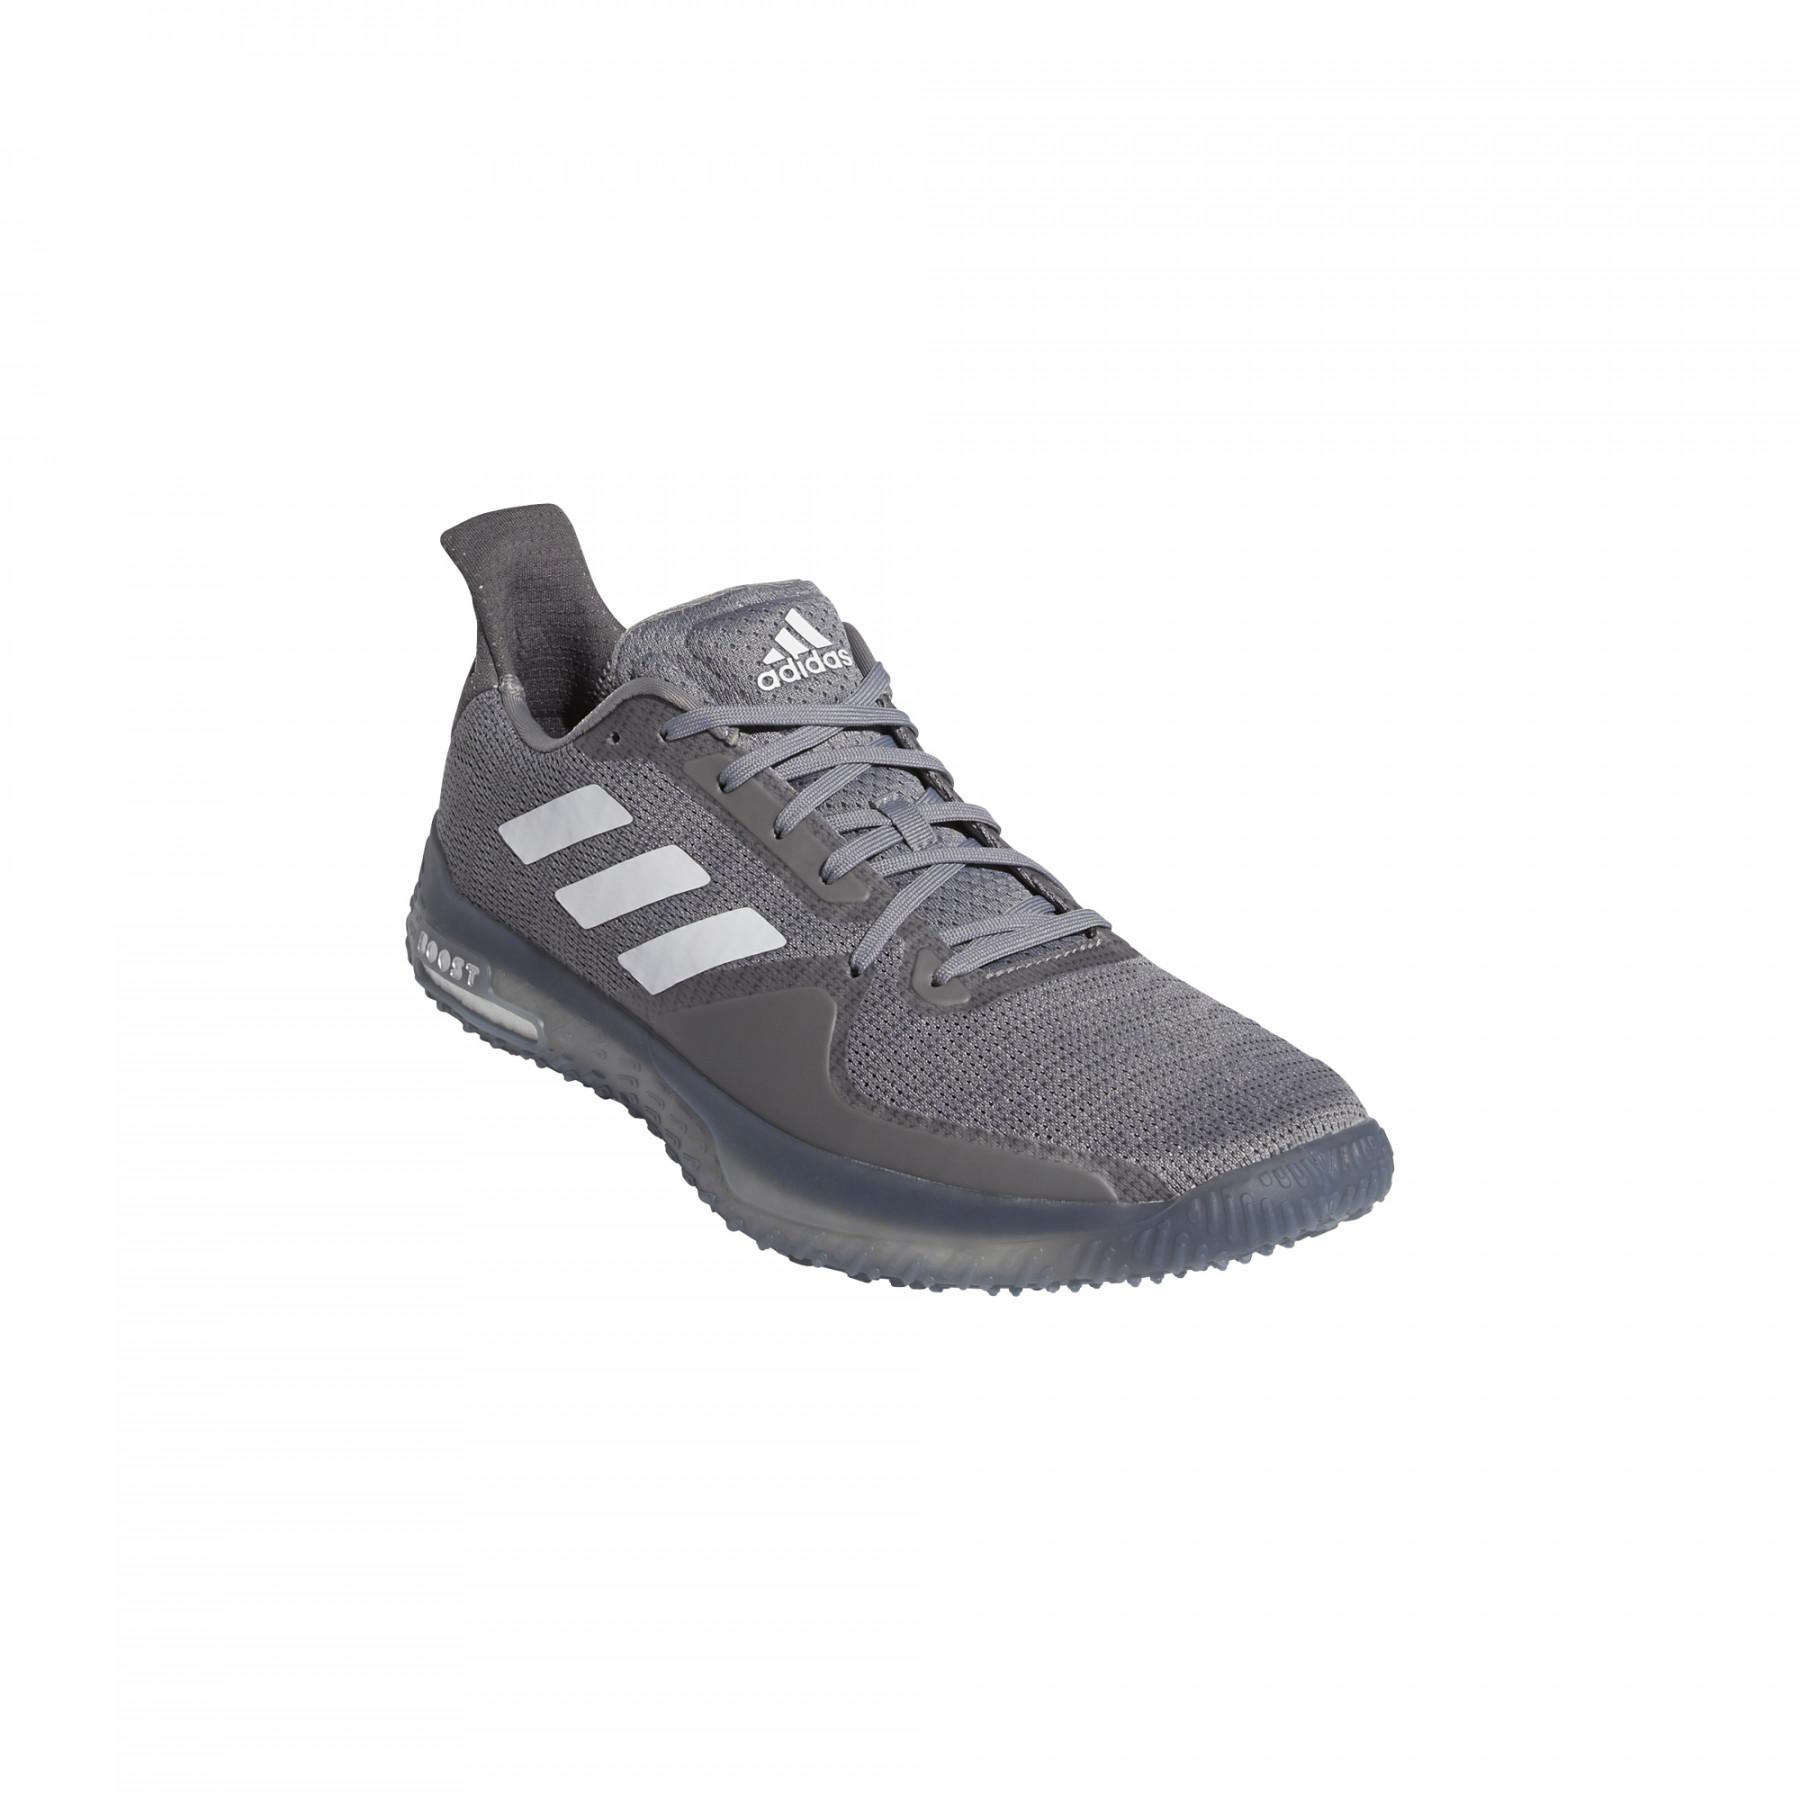 Shoes adidas FitBoost Trainers